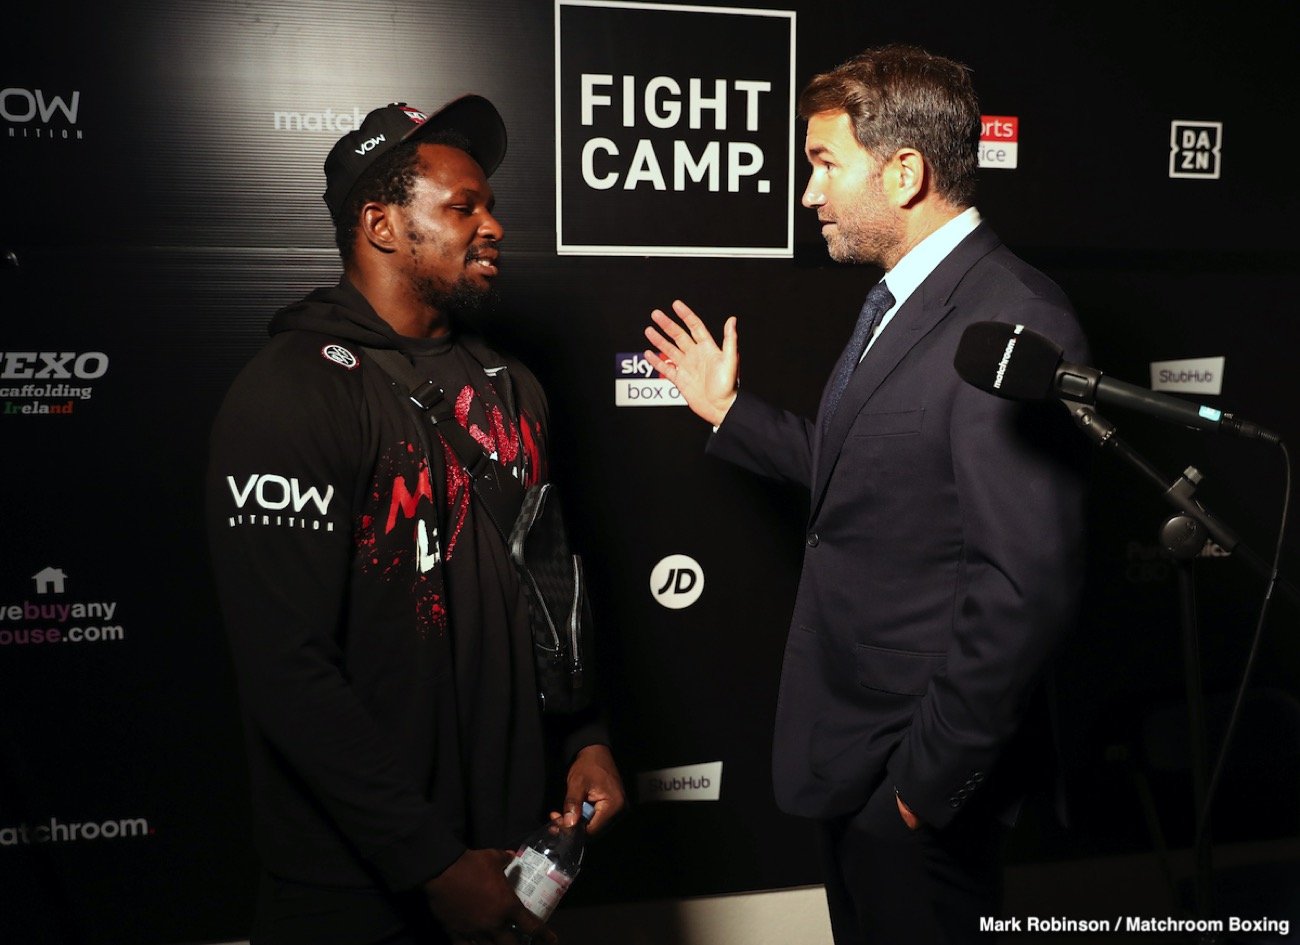 Image: Dean Whyte: Alexander Povetkin will get knocked out by Dillian